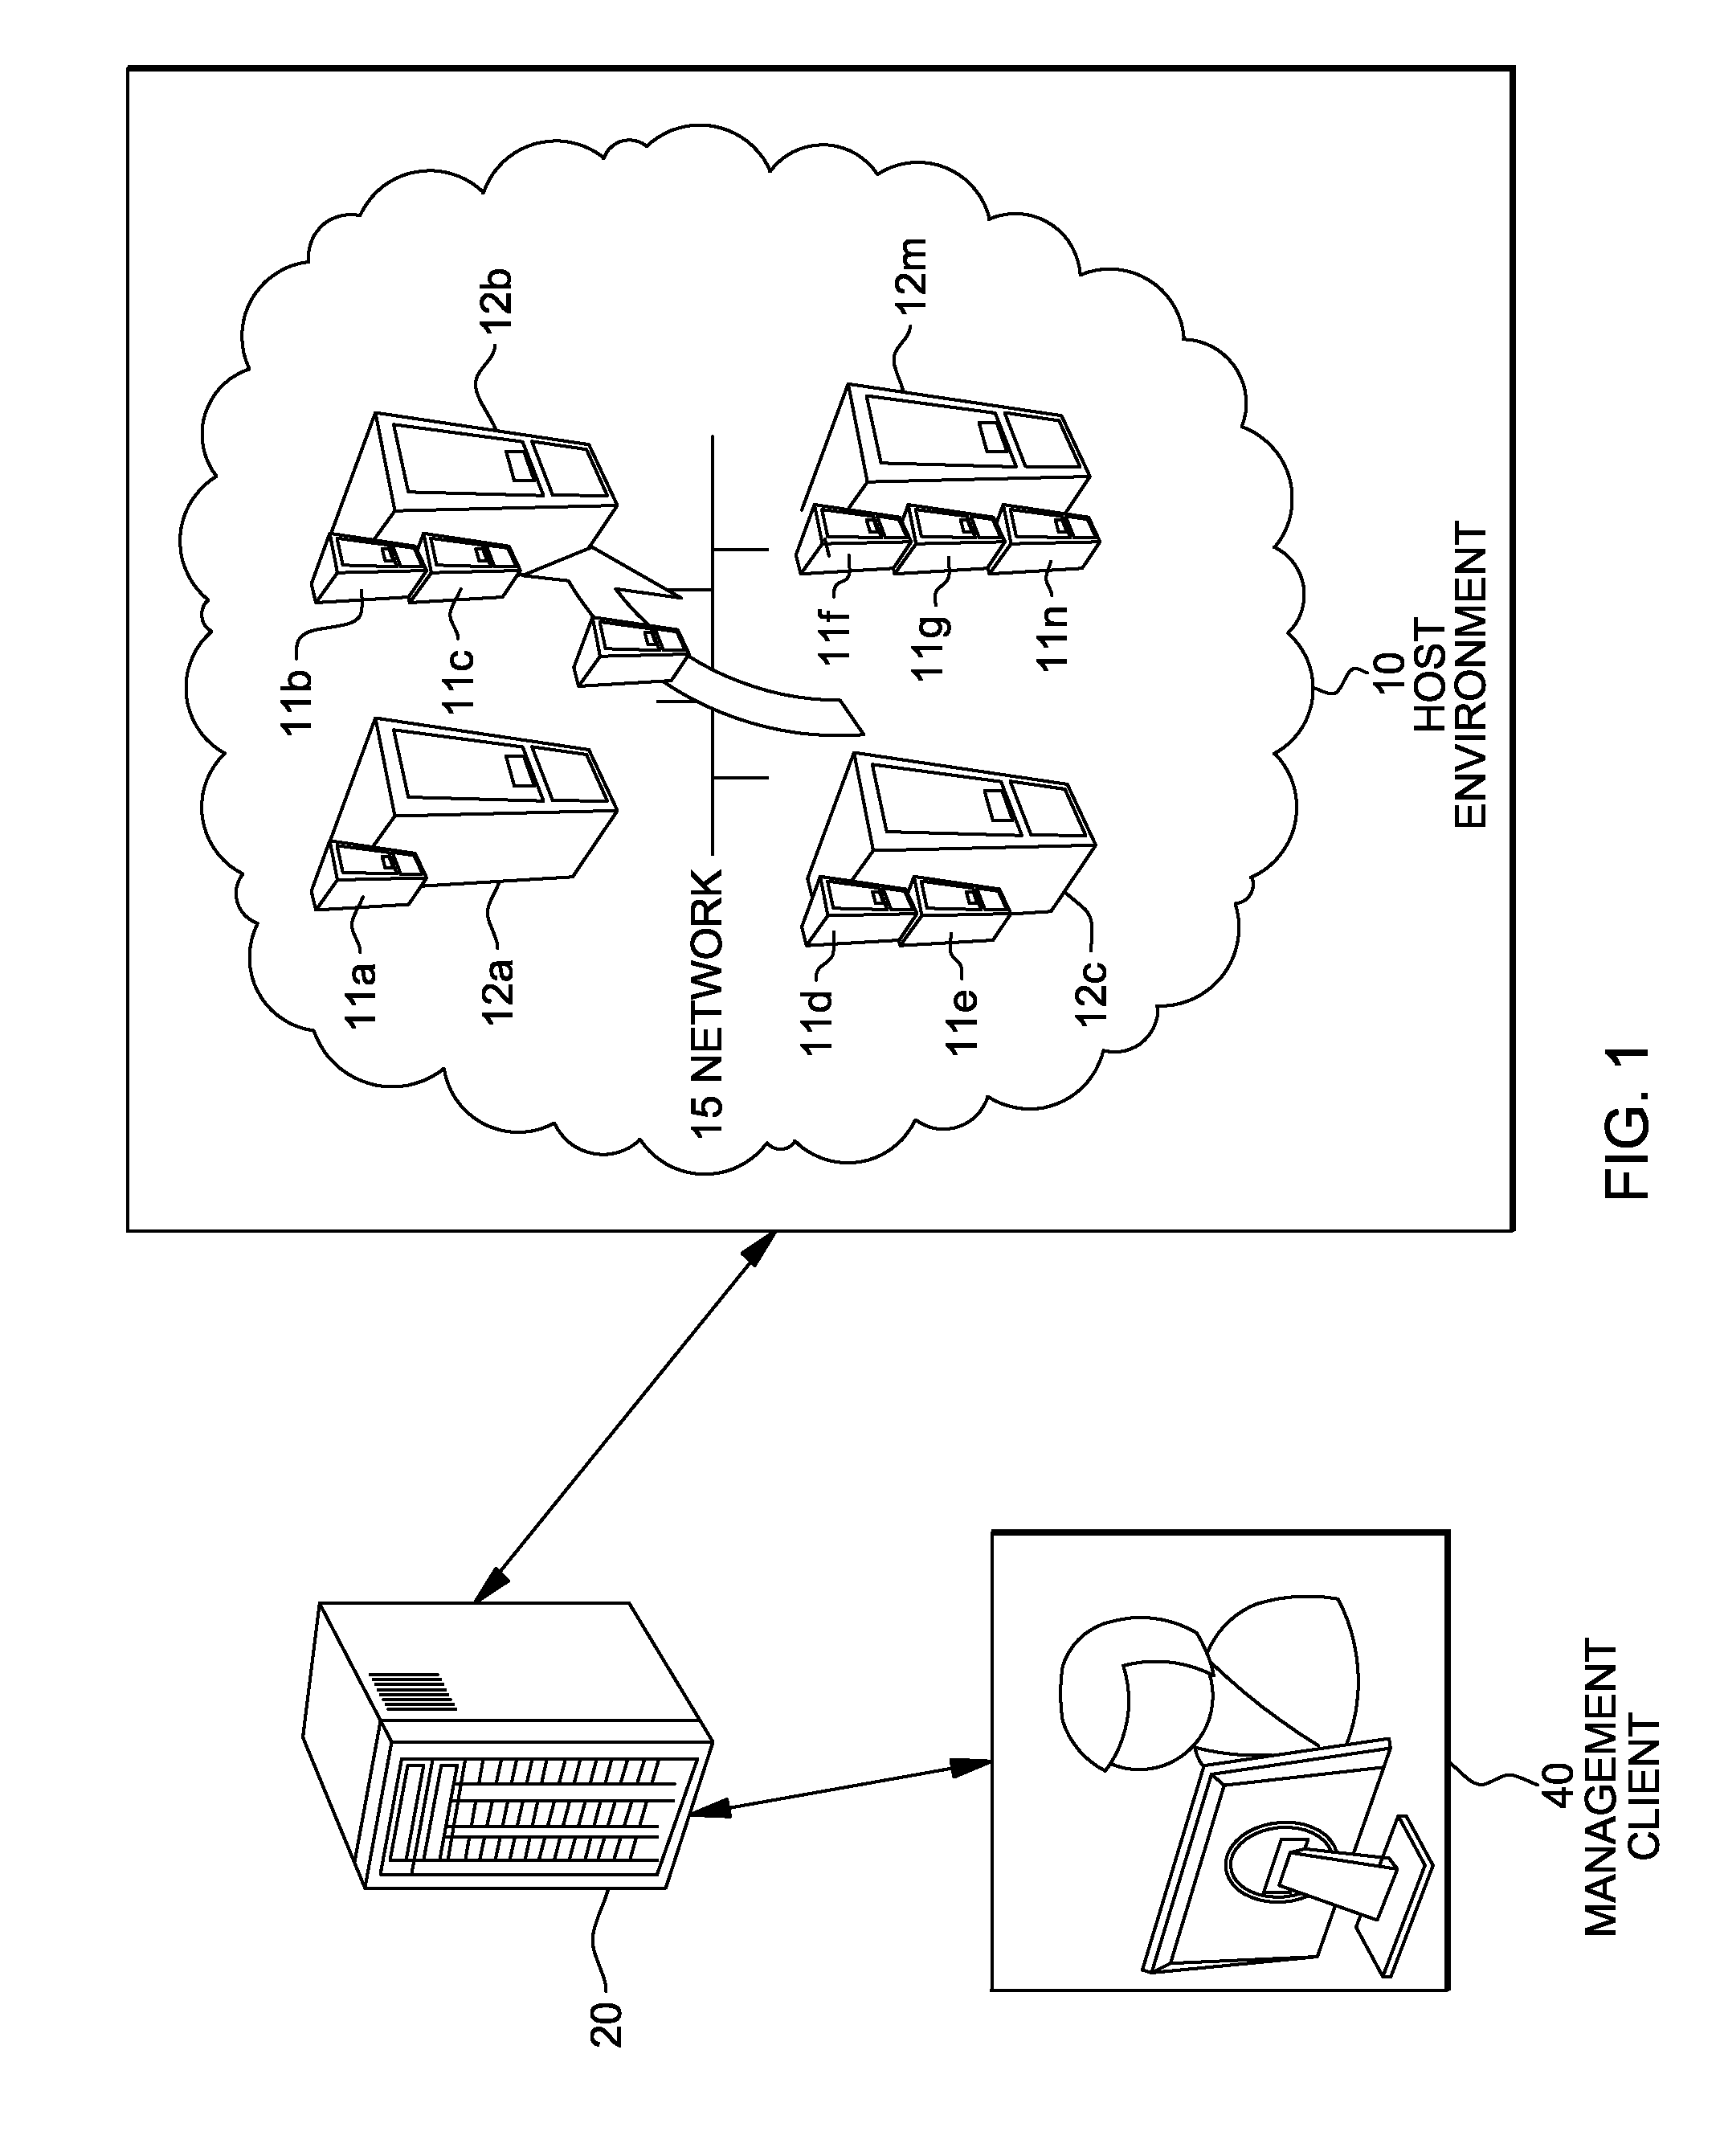 System and method for deploying virtual machines in a computing environment